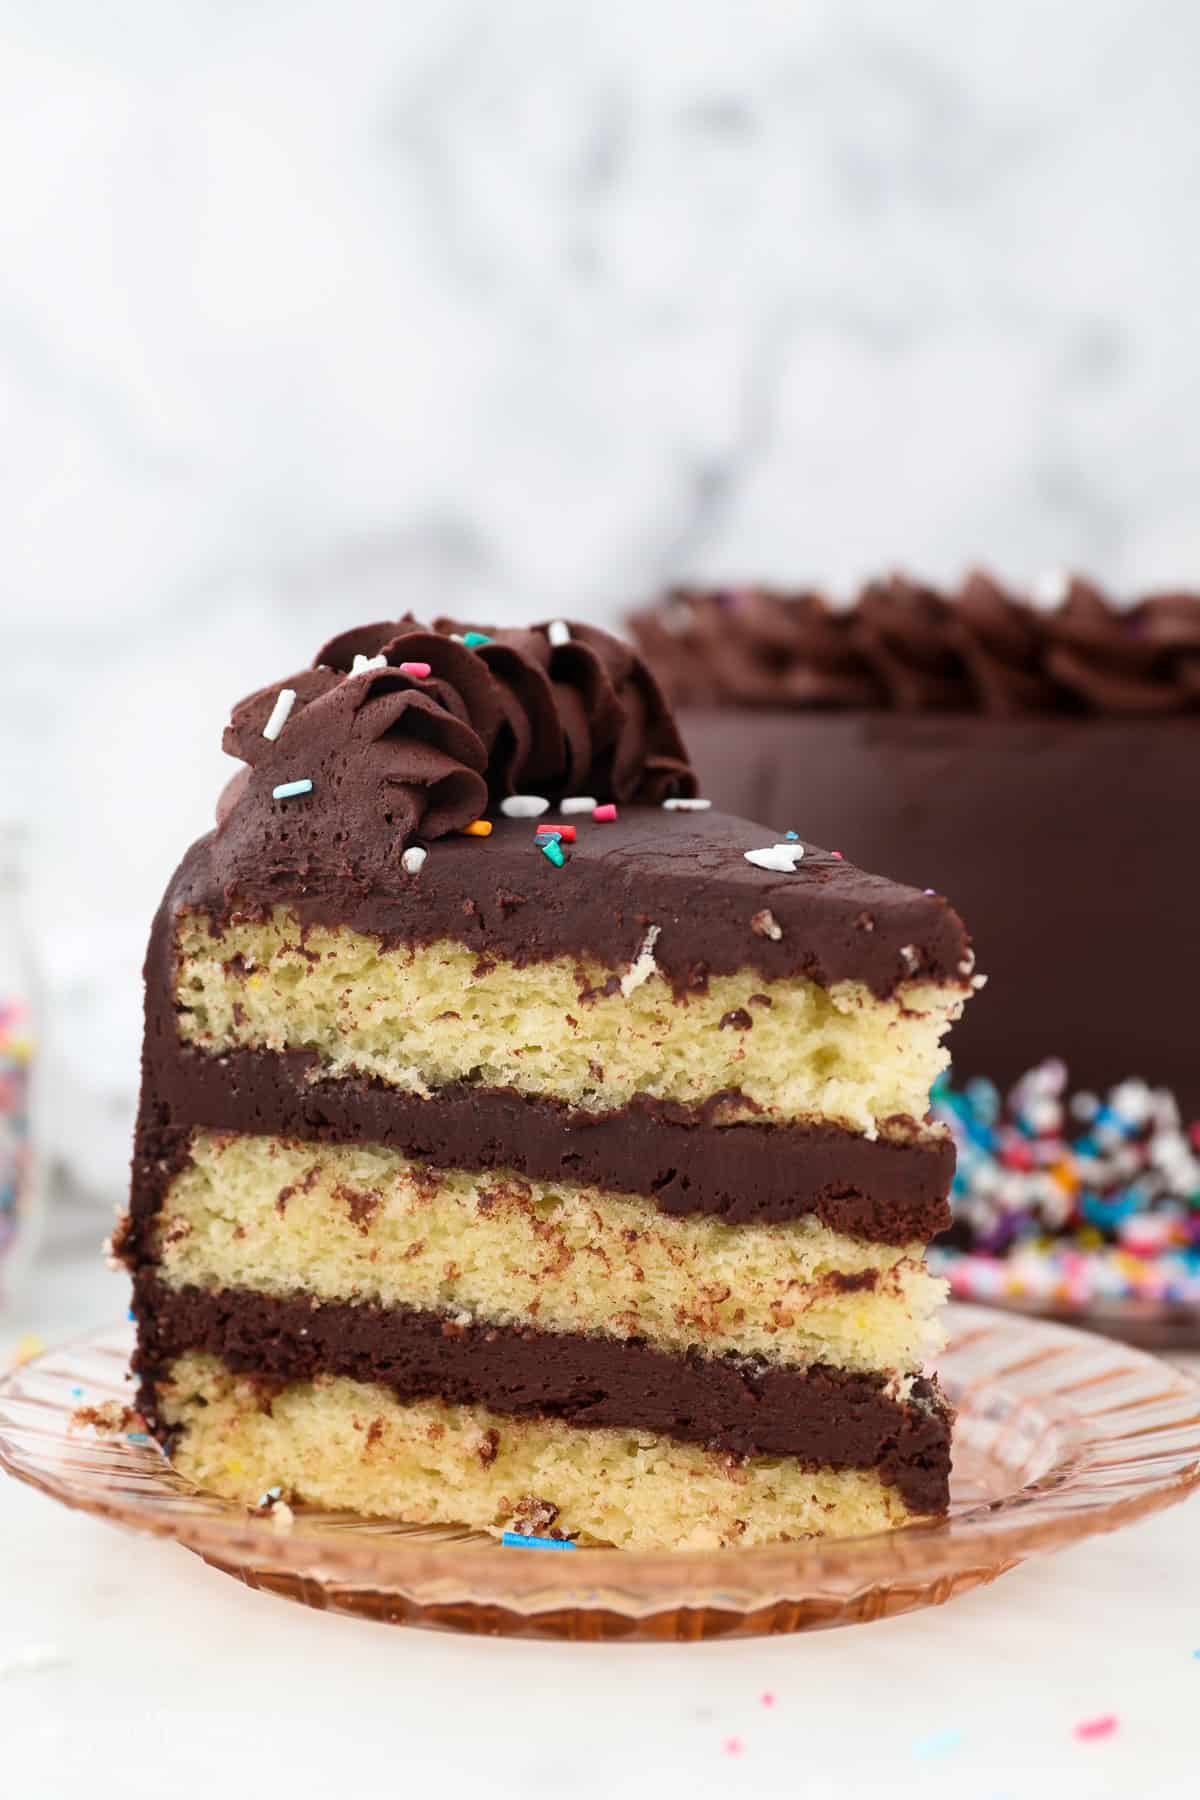 A slice of yellow layer cake with chocolate frosting.